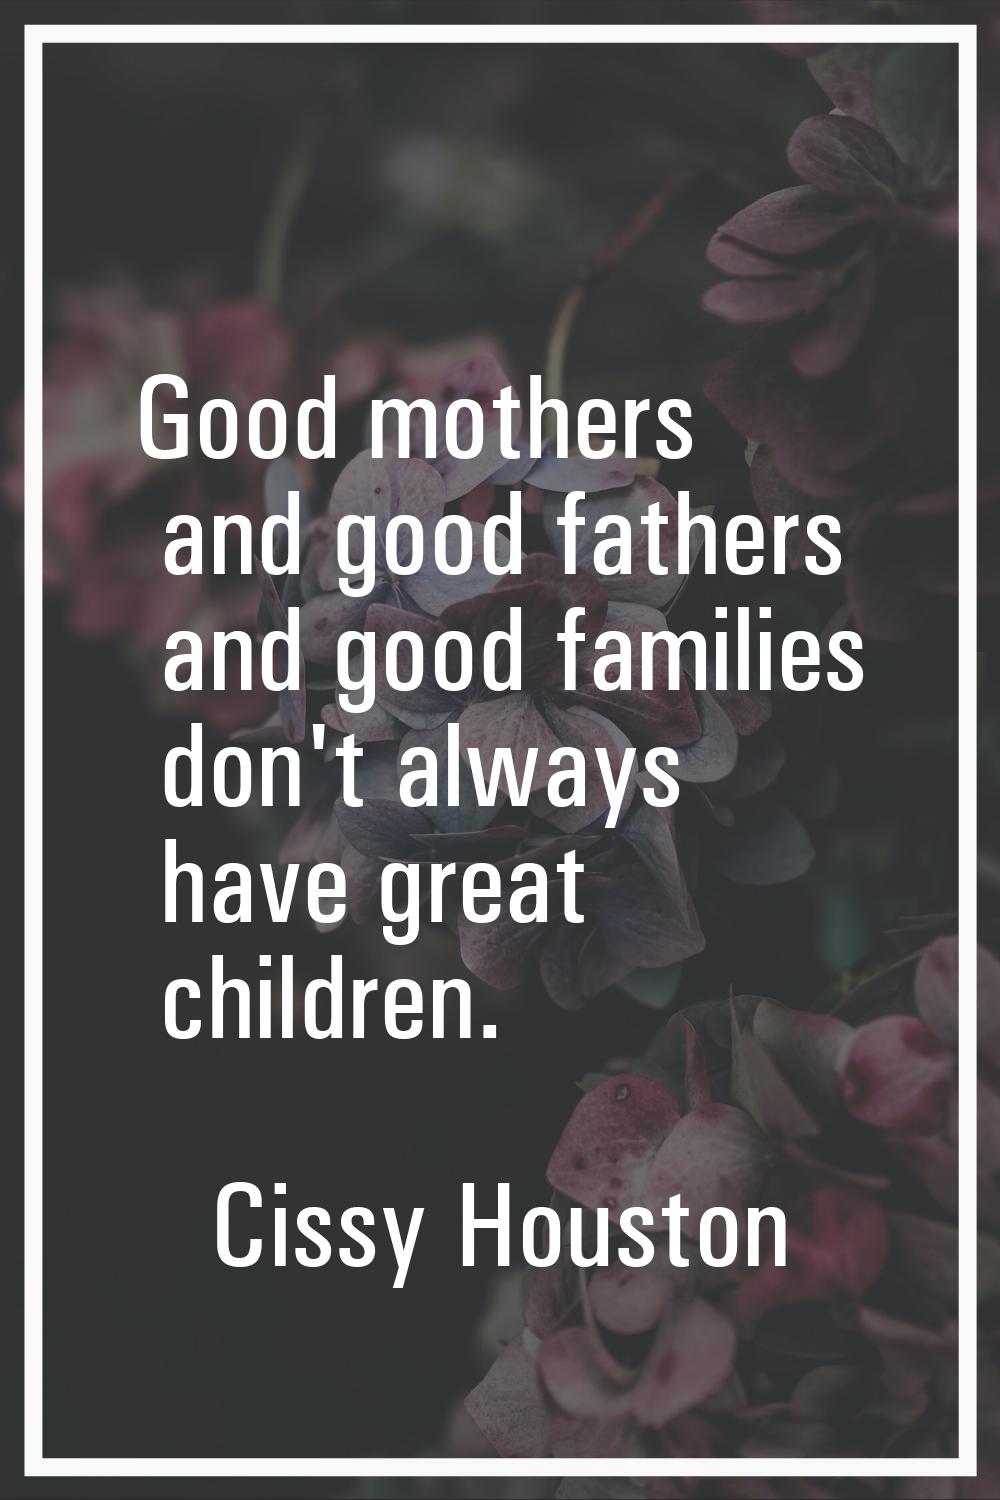 Good mothers and good fathers and good families don't always have great children.